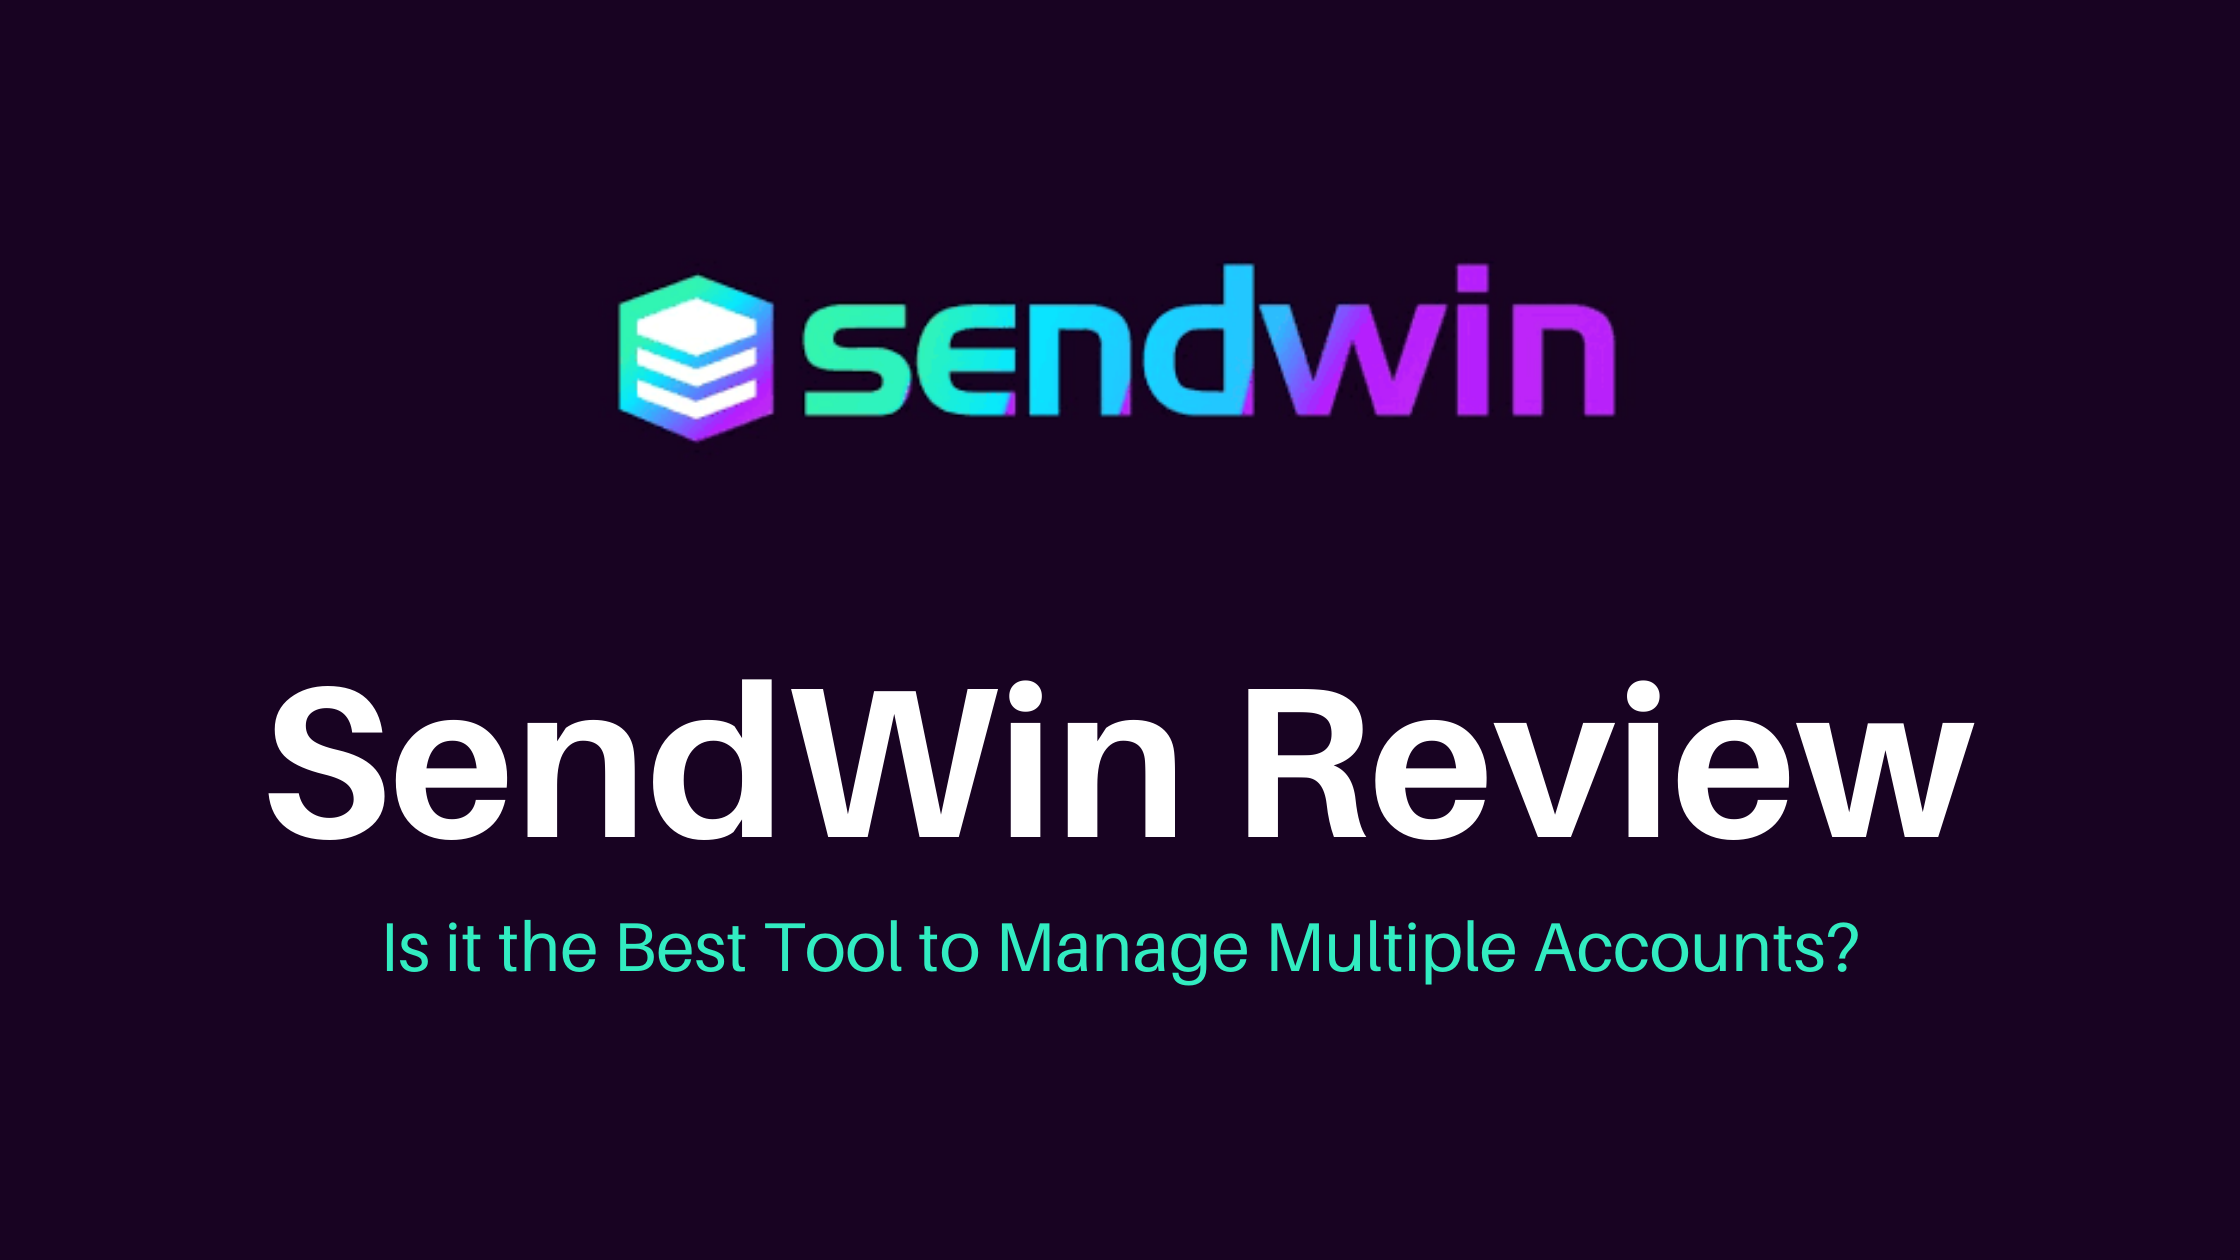 SendWin Review- Is it the Best Tool to Manage Multiple Accounts